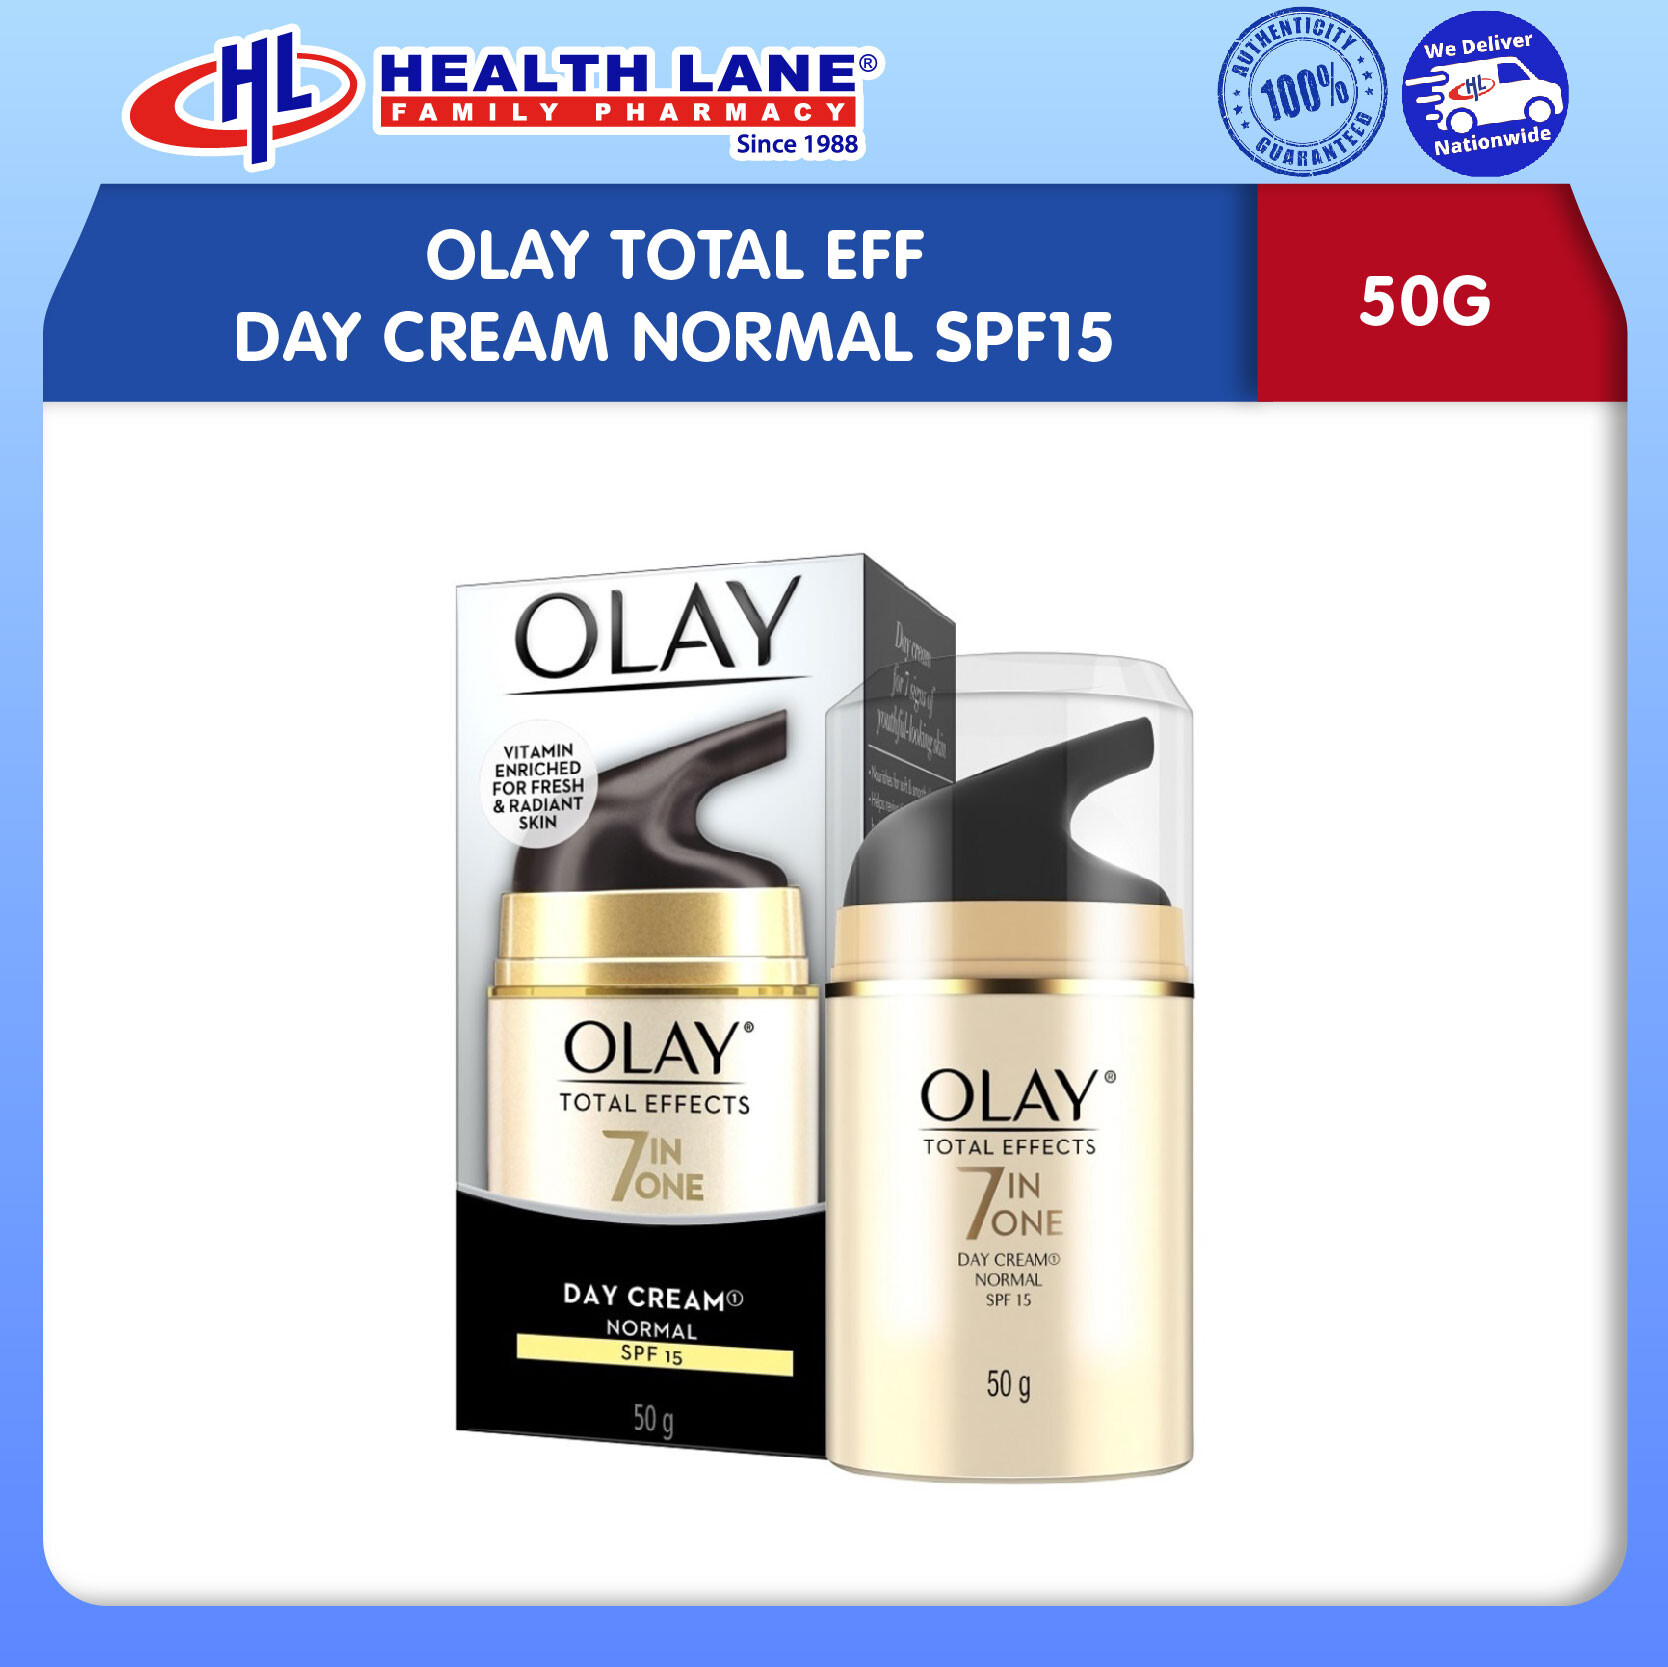 OLAY TOTAL EFFECT CREAM NORMAL SPF15 (50G)